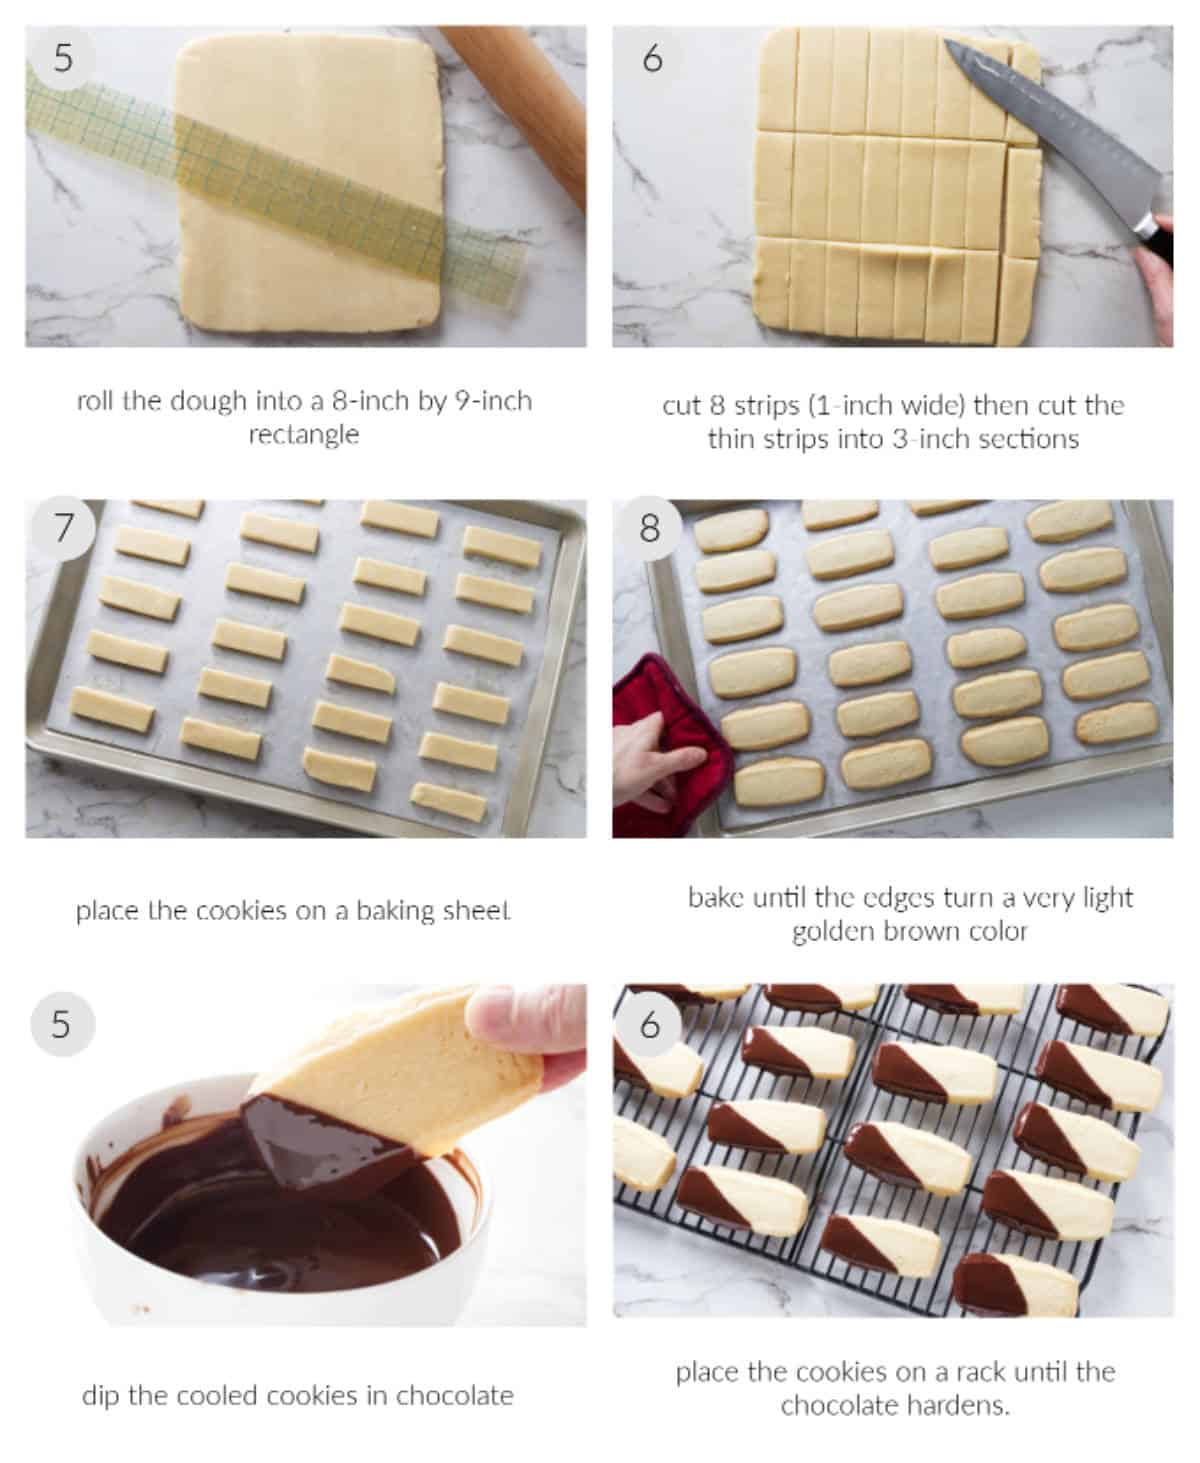 step by step photos on how to make shortbread and dip in chocolate.